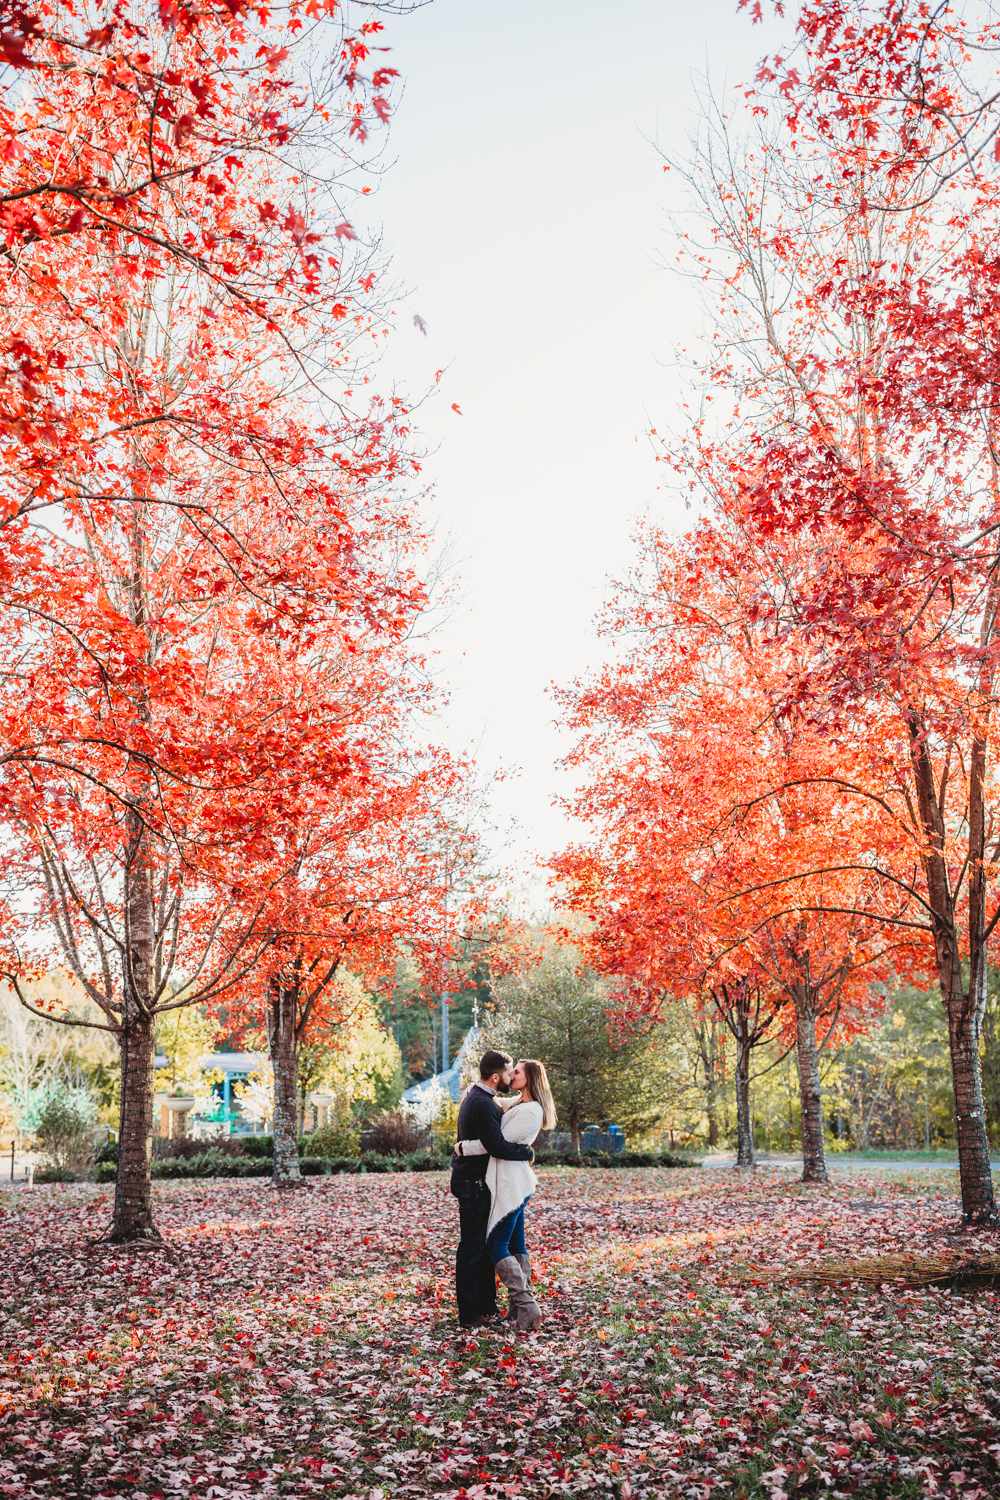 Daniel Stowe Botanical Gardens engagement, Daniel Stowe Botanical Gardens wedding, Daniel Stowe Botanical gardens, North Carolina Engagement Photographer, Charlotte NC Engagement, North Carolina engagement Picture ideas, Charlotte NC wedding Photographer, engagement locations in Charlotte NC, engagement inspiration, Best places for an engagement session in Charlotte NC, North Carolina Engagement Photos, Asheville NC Engagement Photos, fall engagement photos, winter engagement photos